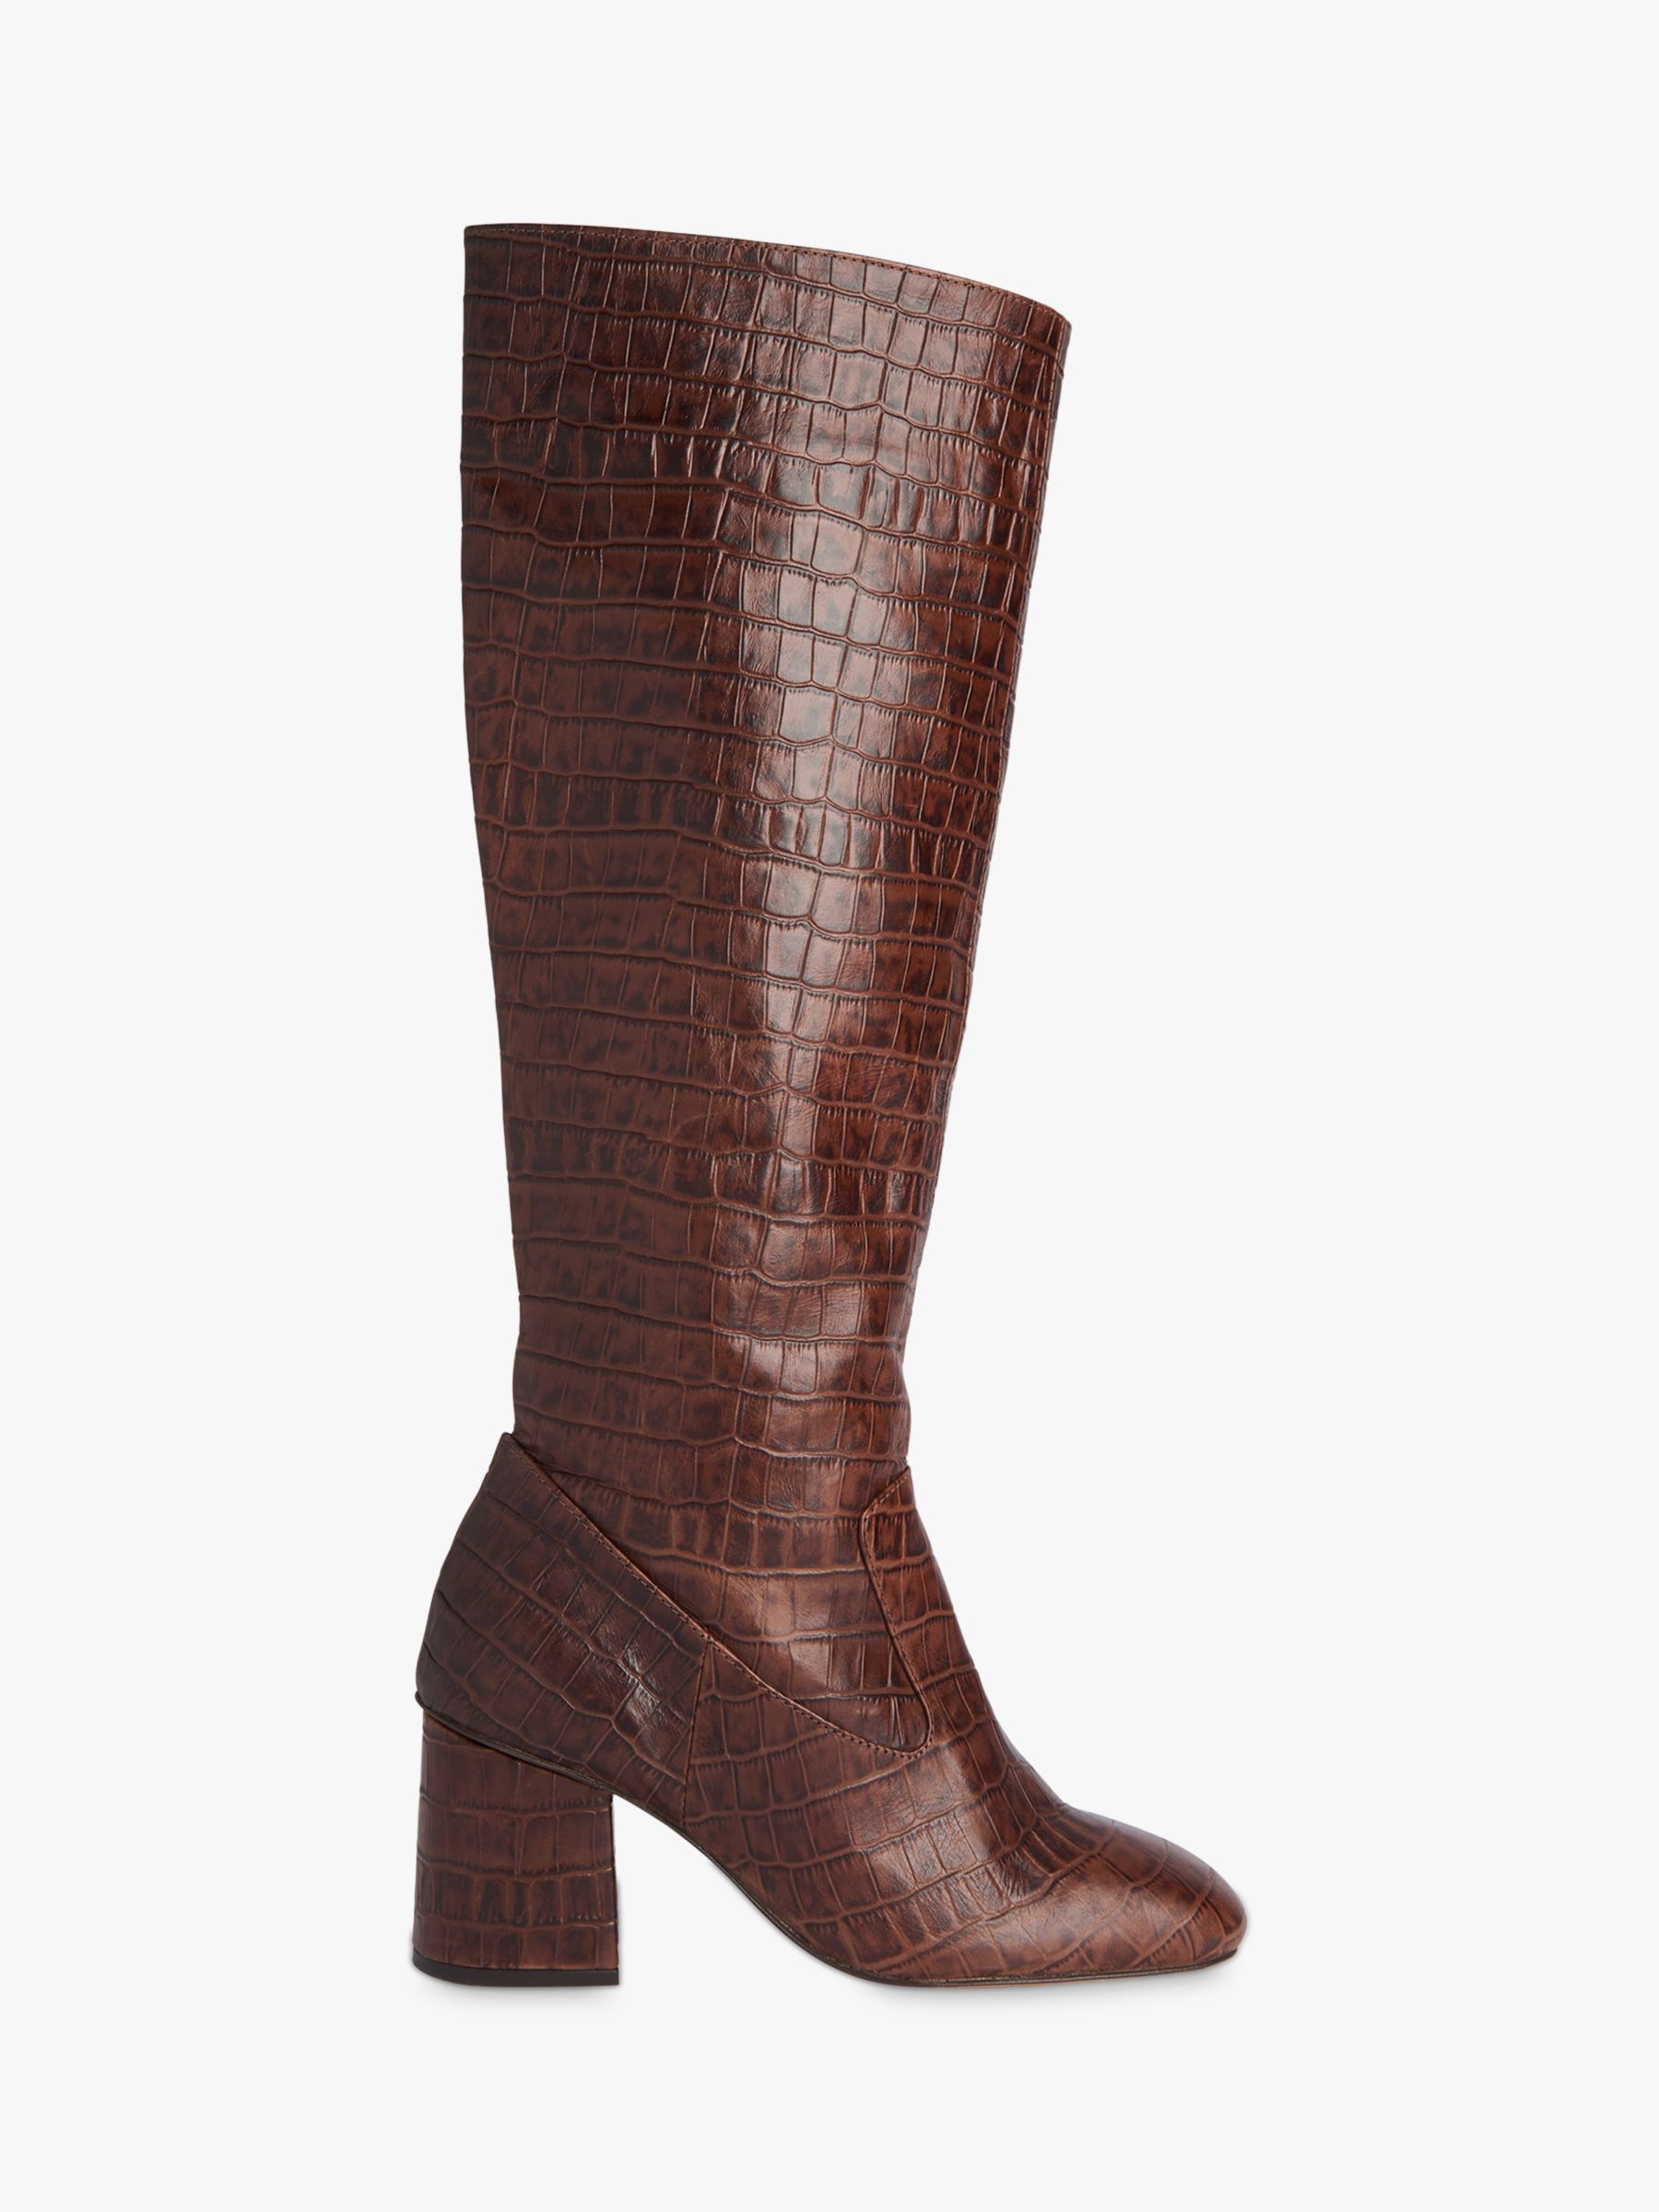 croc leather boots